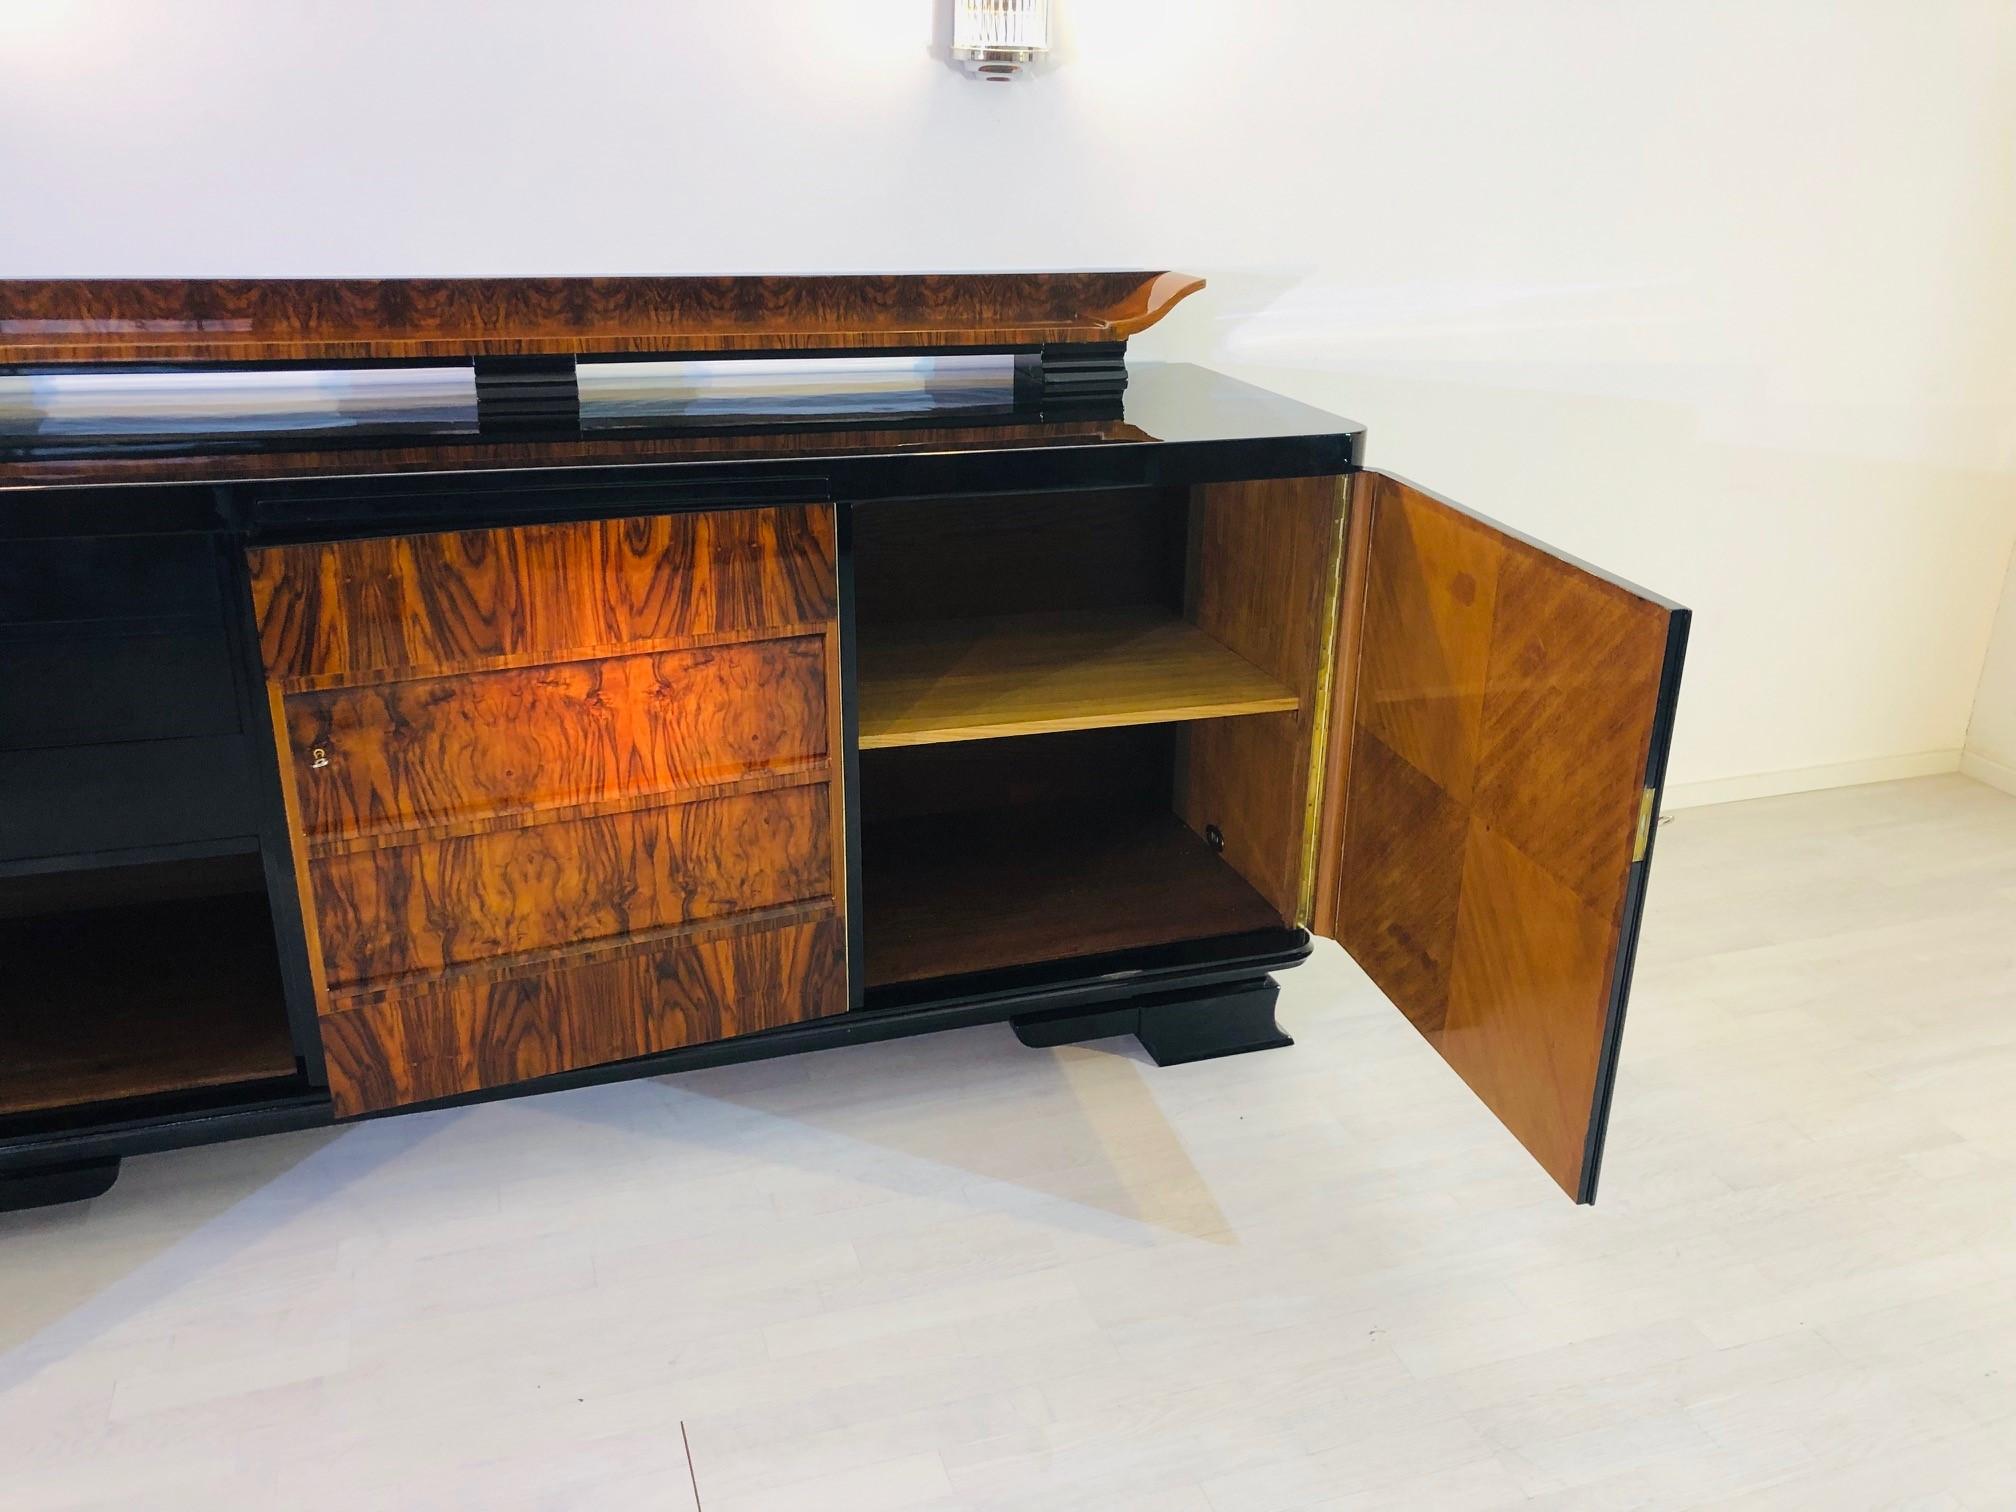 1920s Art Deco Sideboard Made of Caucasian Walnut and Shellac Finish 2